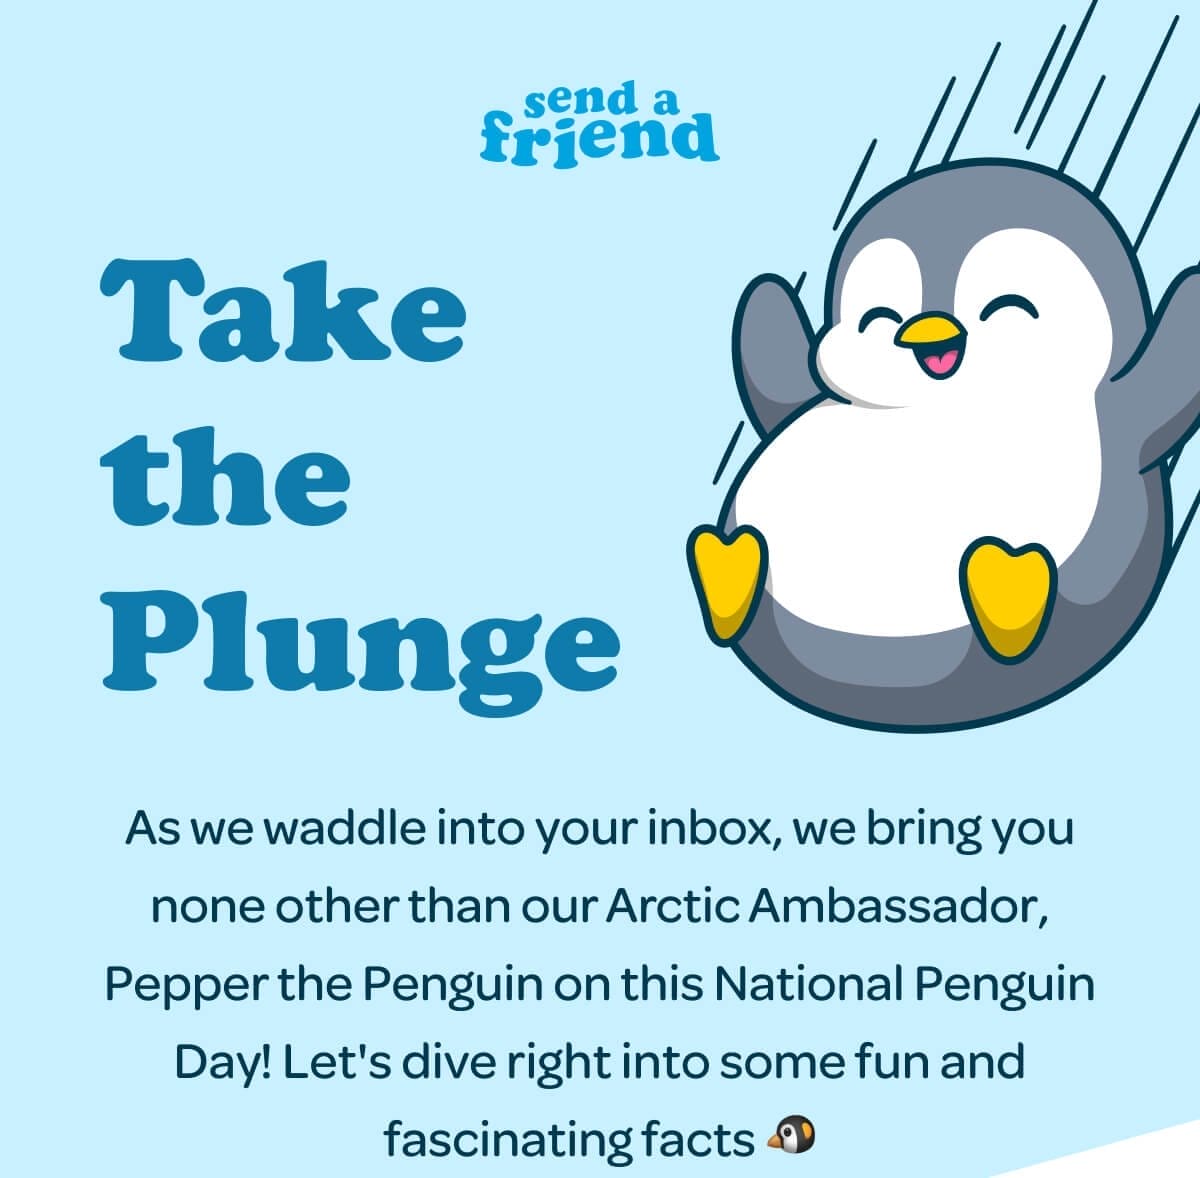 Take the Plunge. As we waddle into your inbox, we bring you none other than our Arctic Ambassador, Pepper the Penguin on this National Penguin Day! Let's dive right into some fun and fascinating facts 🐧